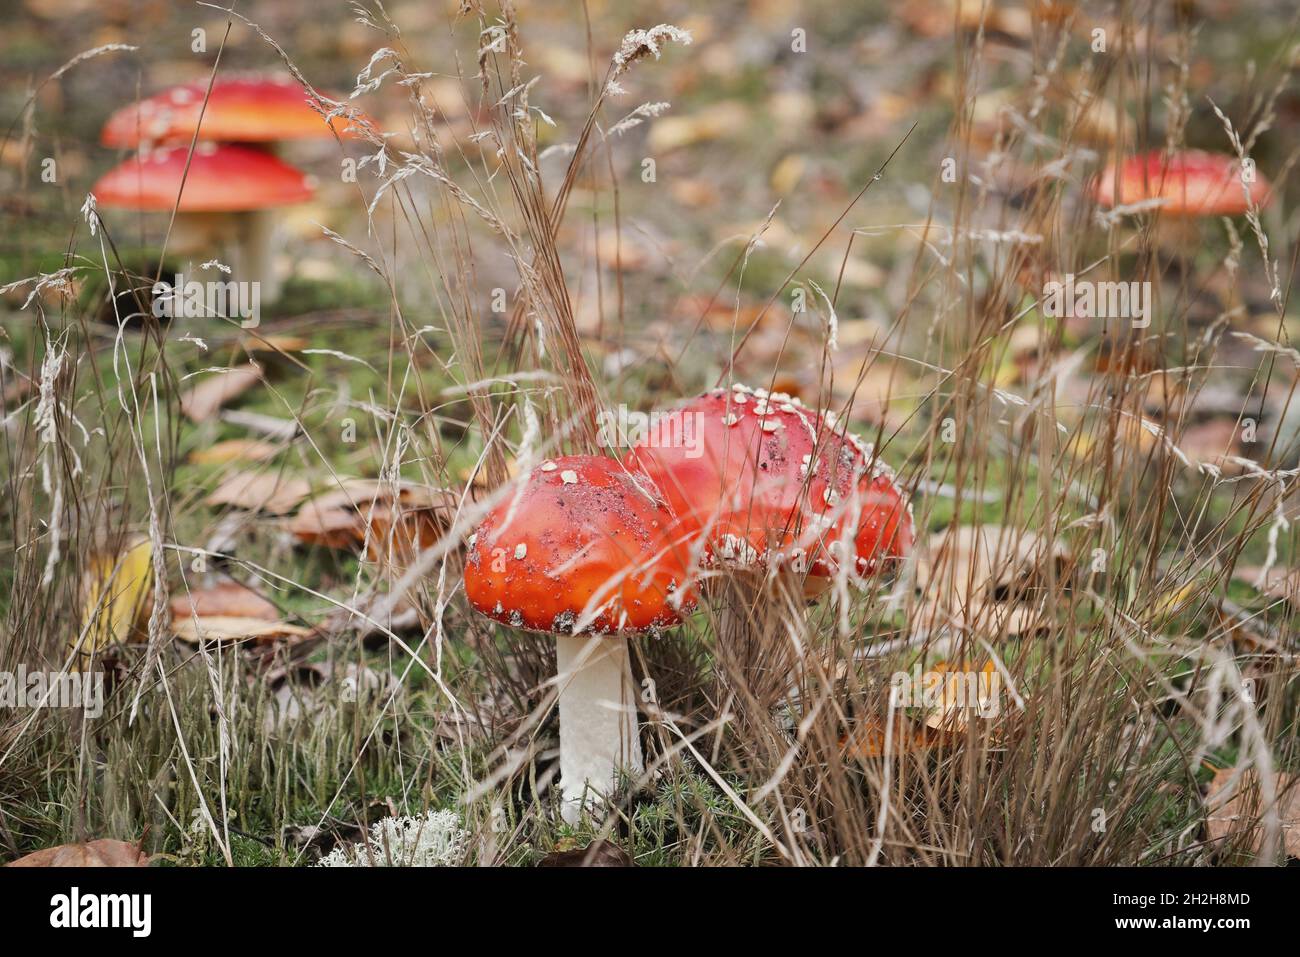 Red fly Amanita mushrooms in autumn forest floor Stock Photo